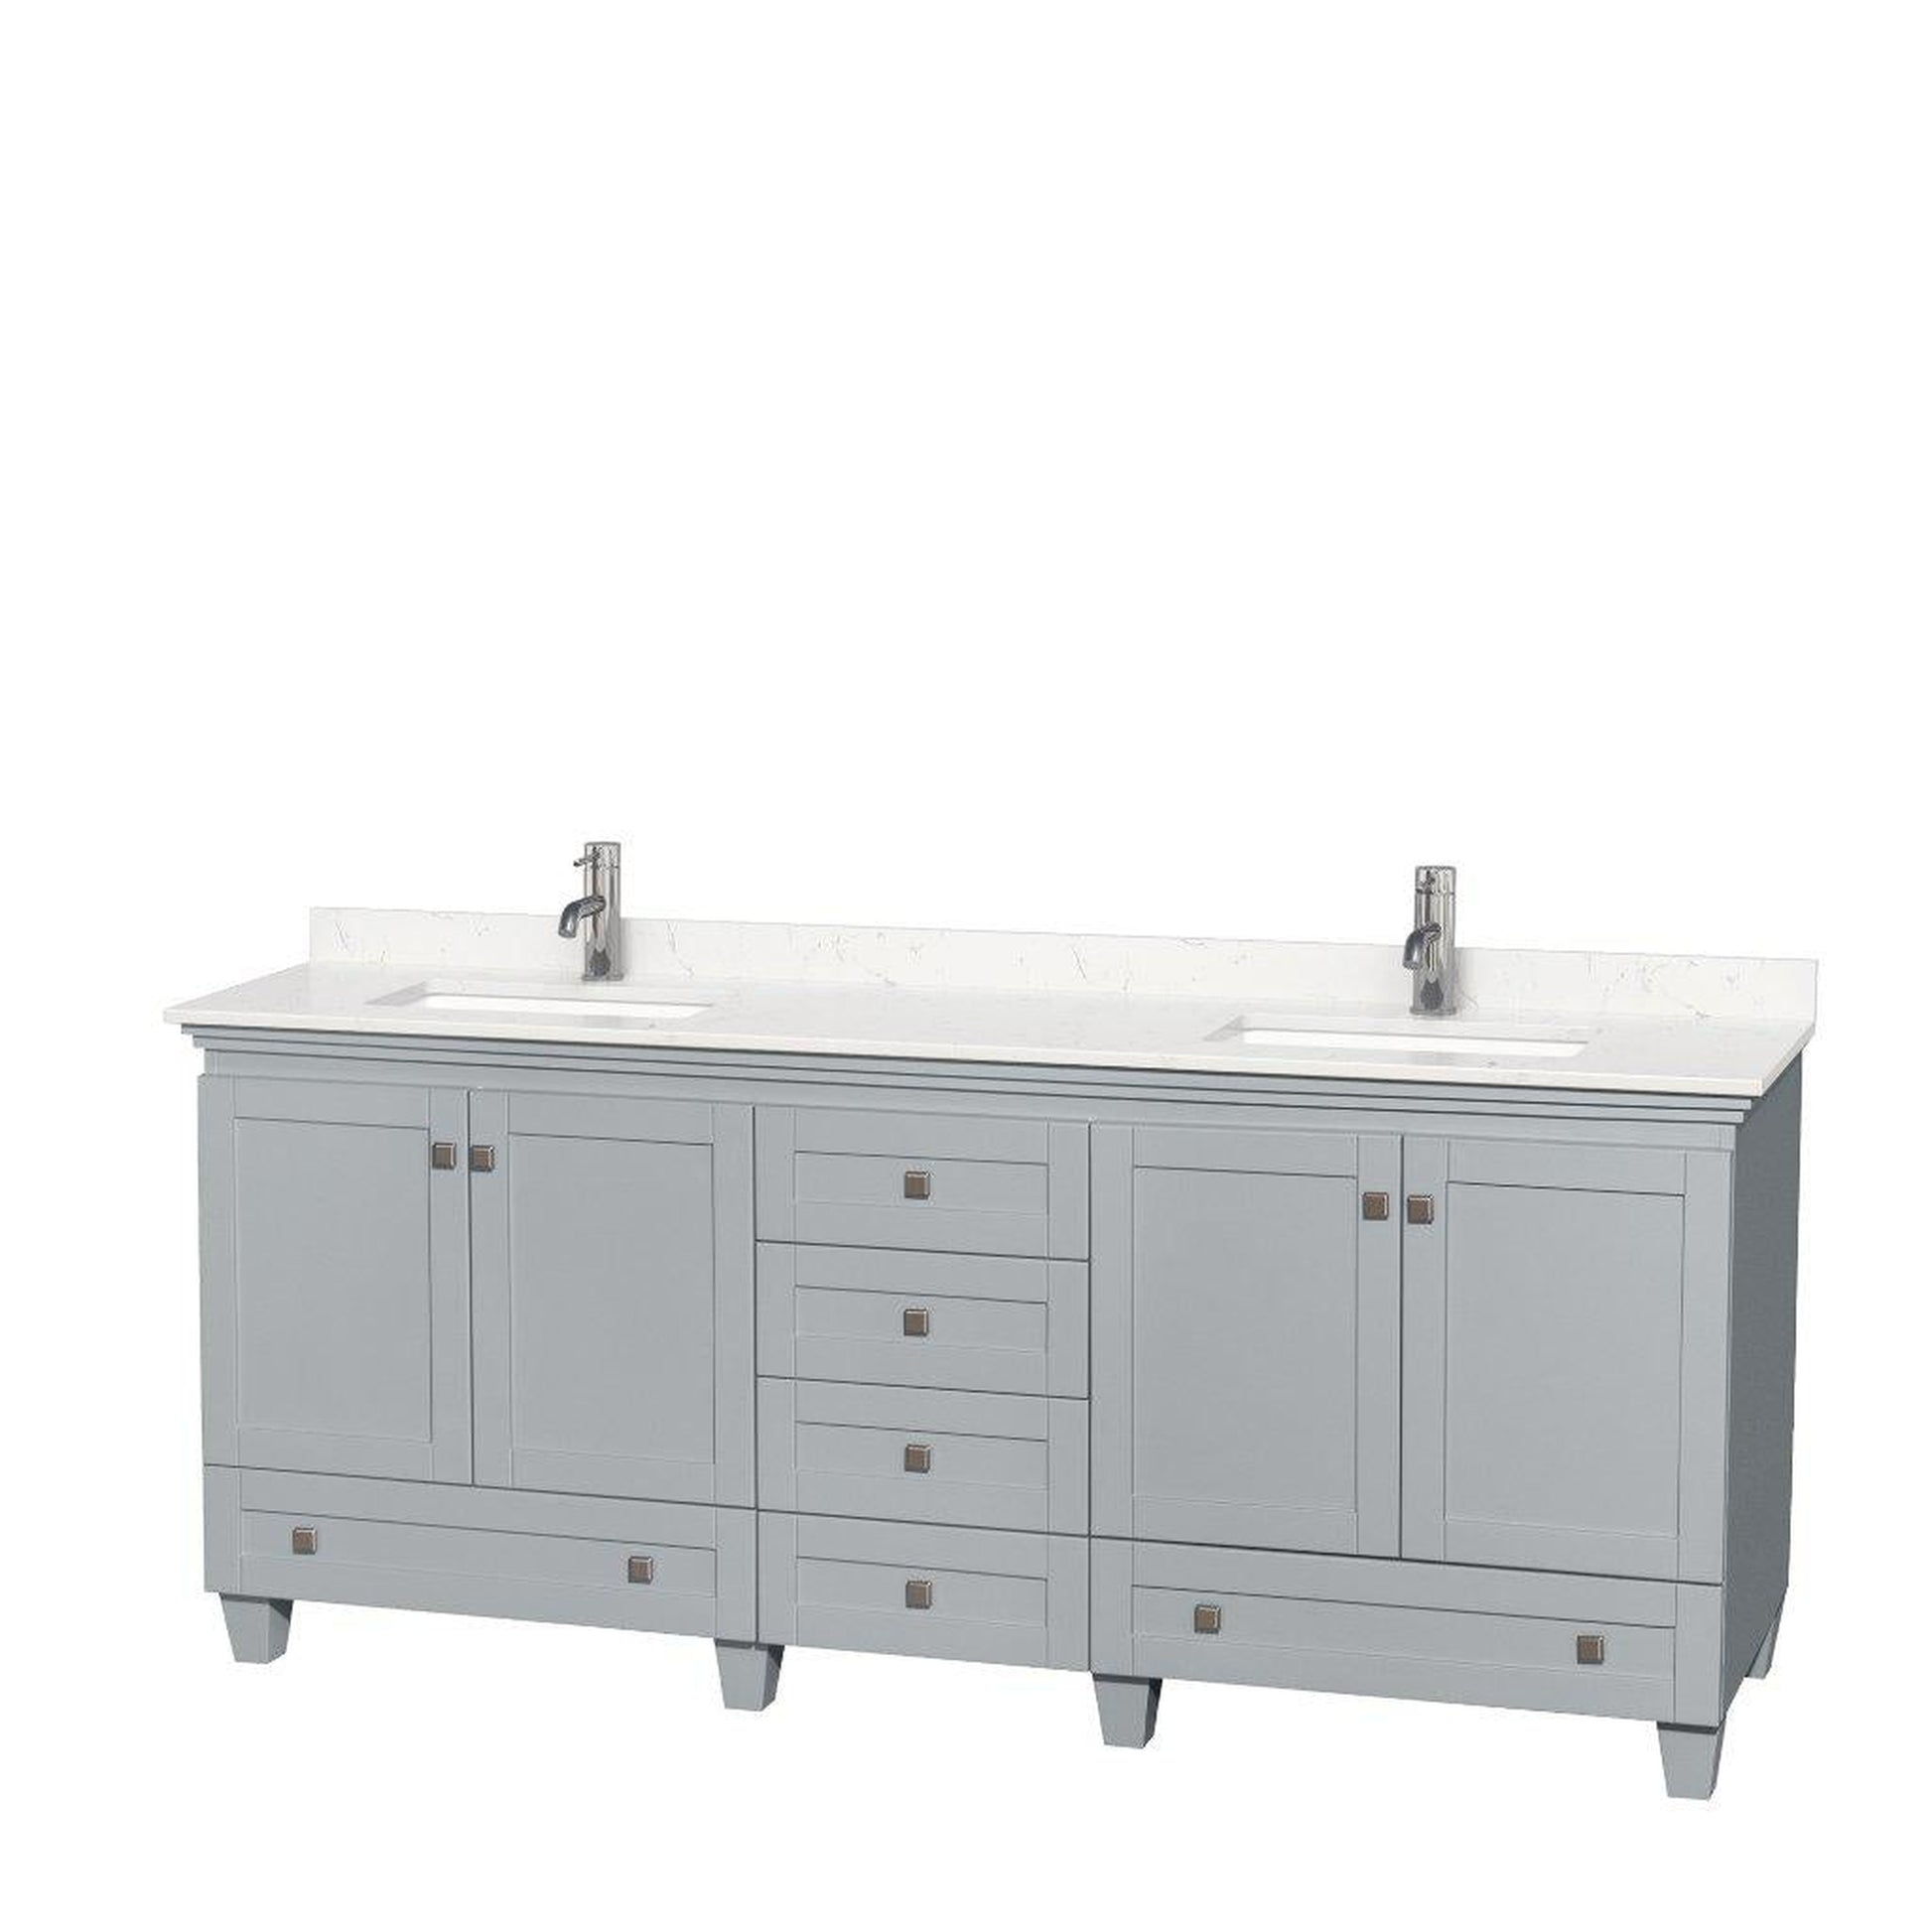 Wyndham Collection Acclaim 80" Double Bathroom Oyster Gray Vanity With Light-Vein Carrara Cultured Marble Countertop And Undermount Square Sinks